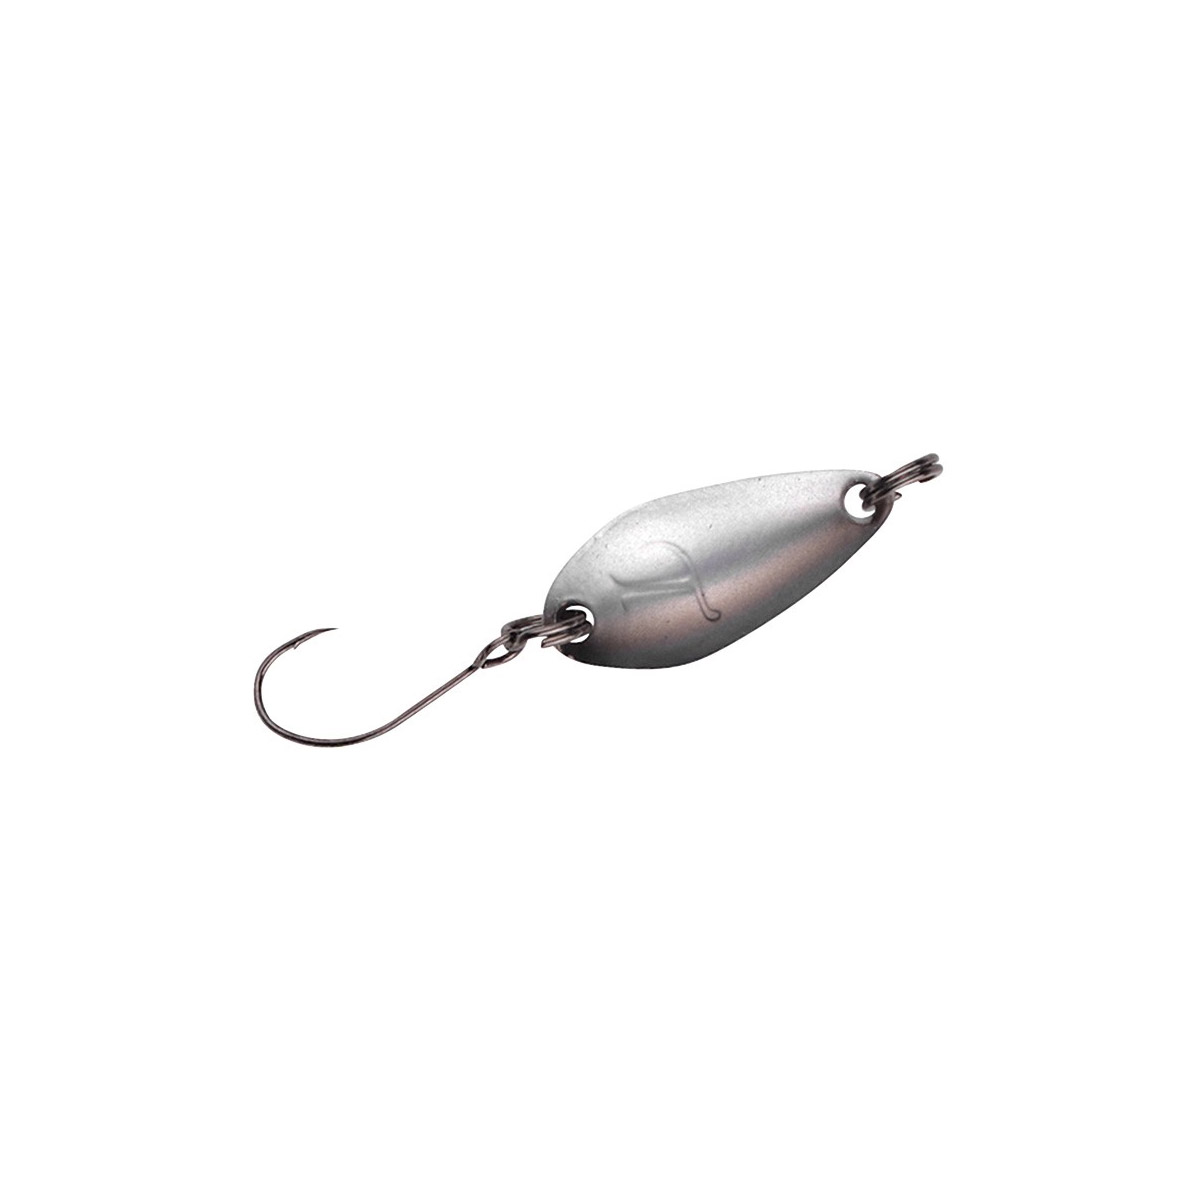 Spro Trout Master Incy Spoon 1,5 Gram -  Minnow 